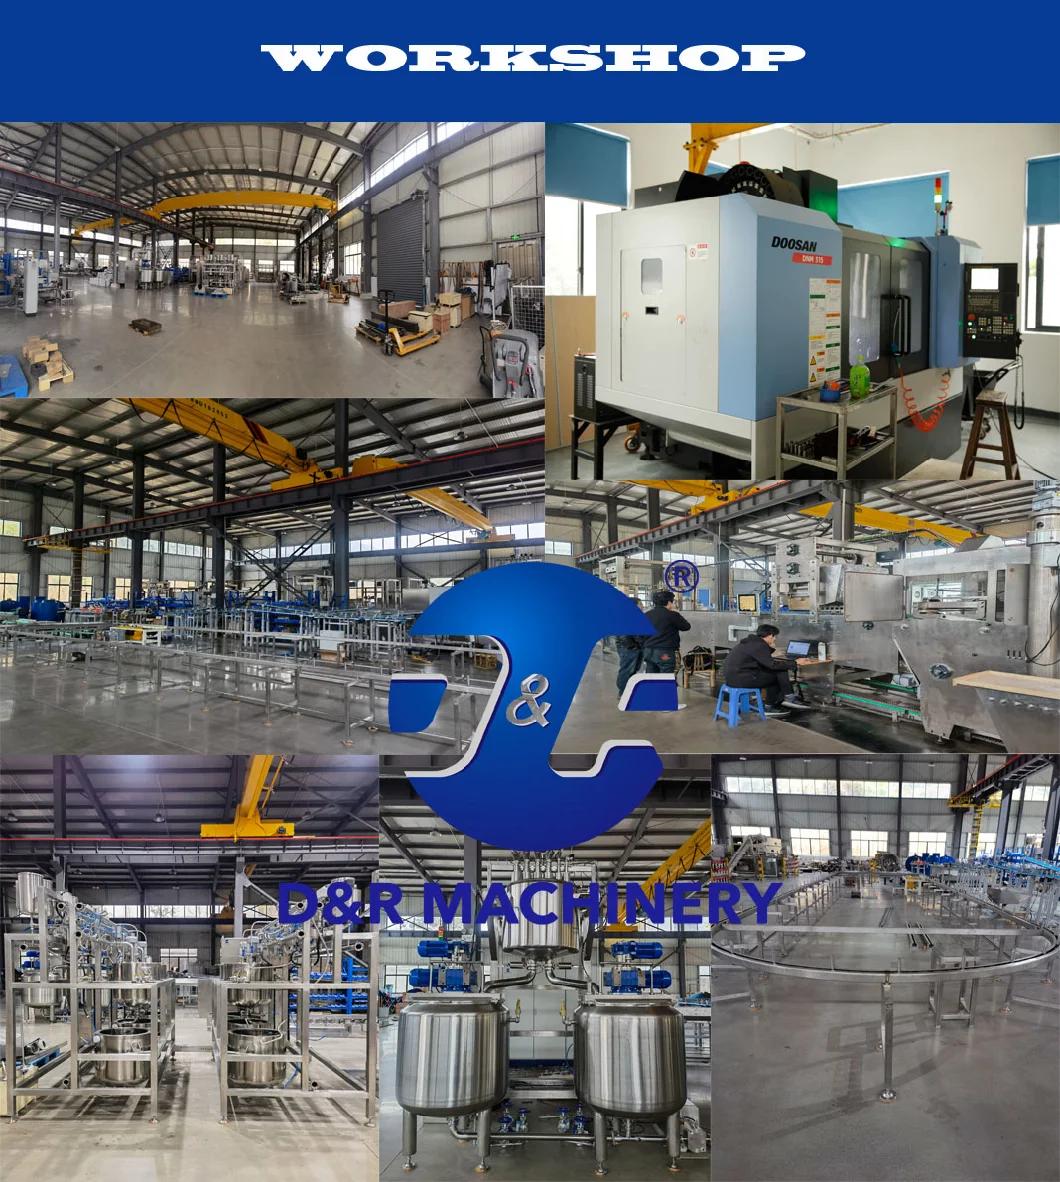 Professional Commercial Chocolate Tempering Machine Tempering Chocolate Machine